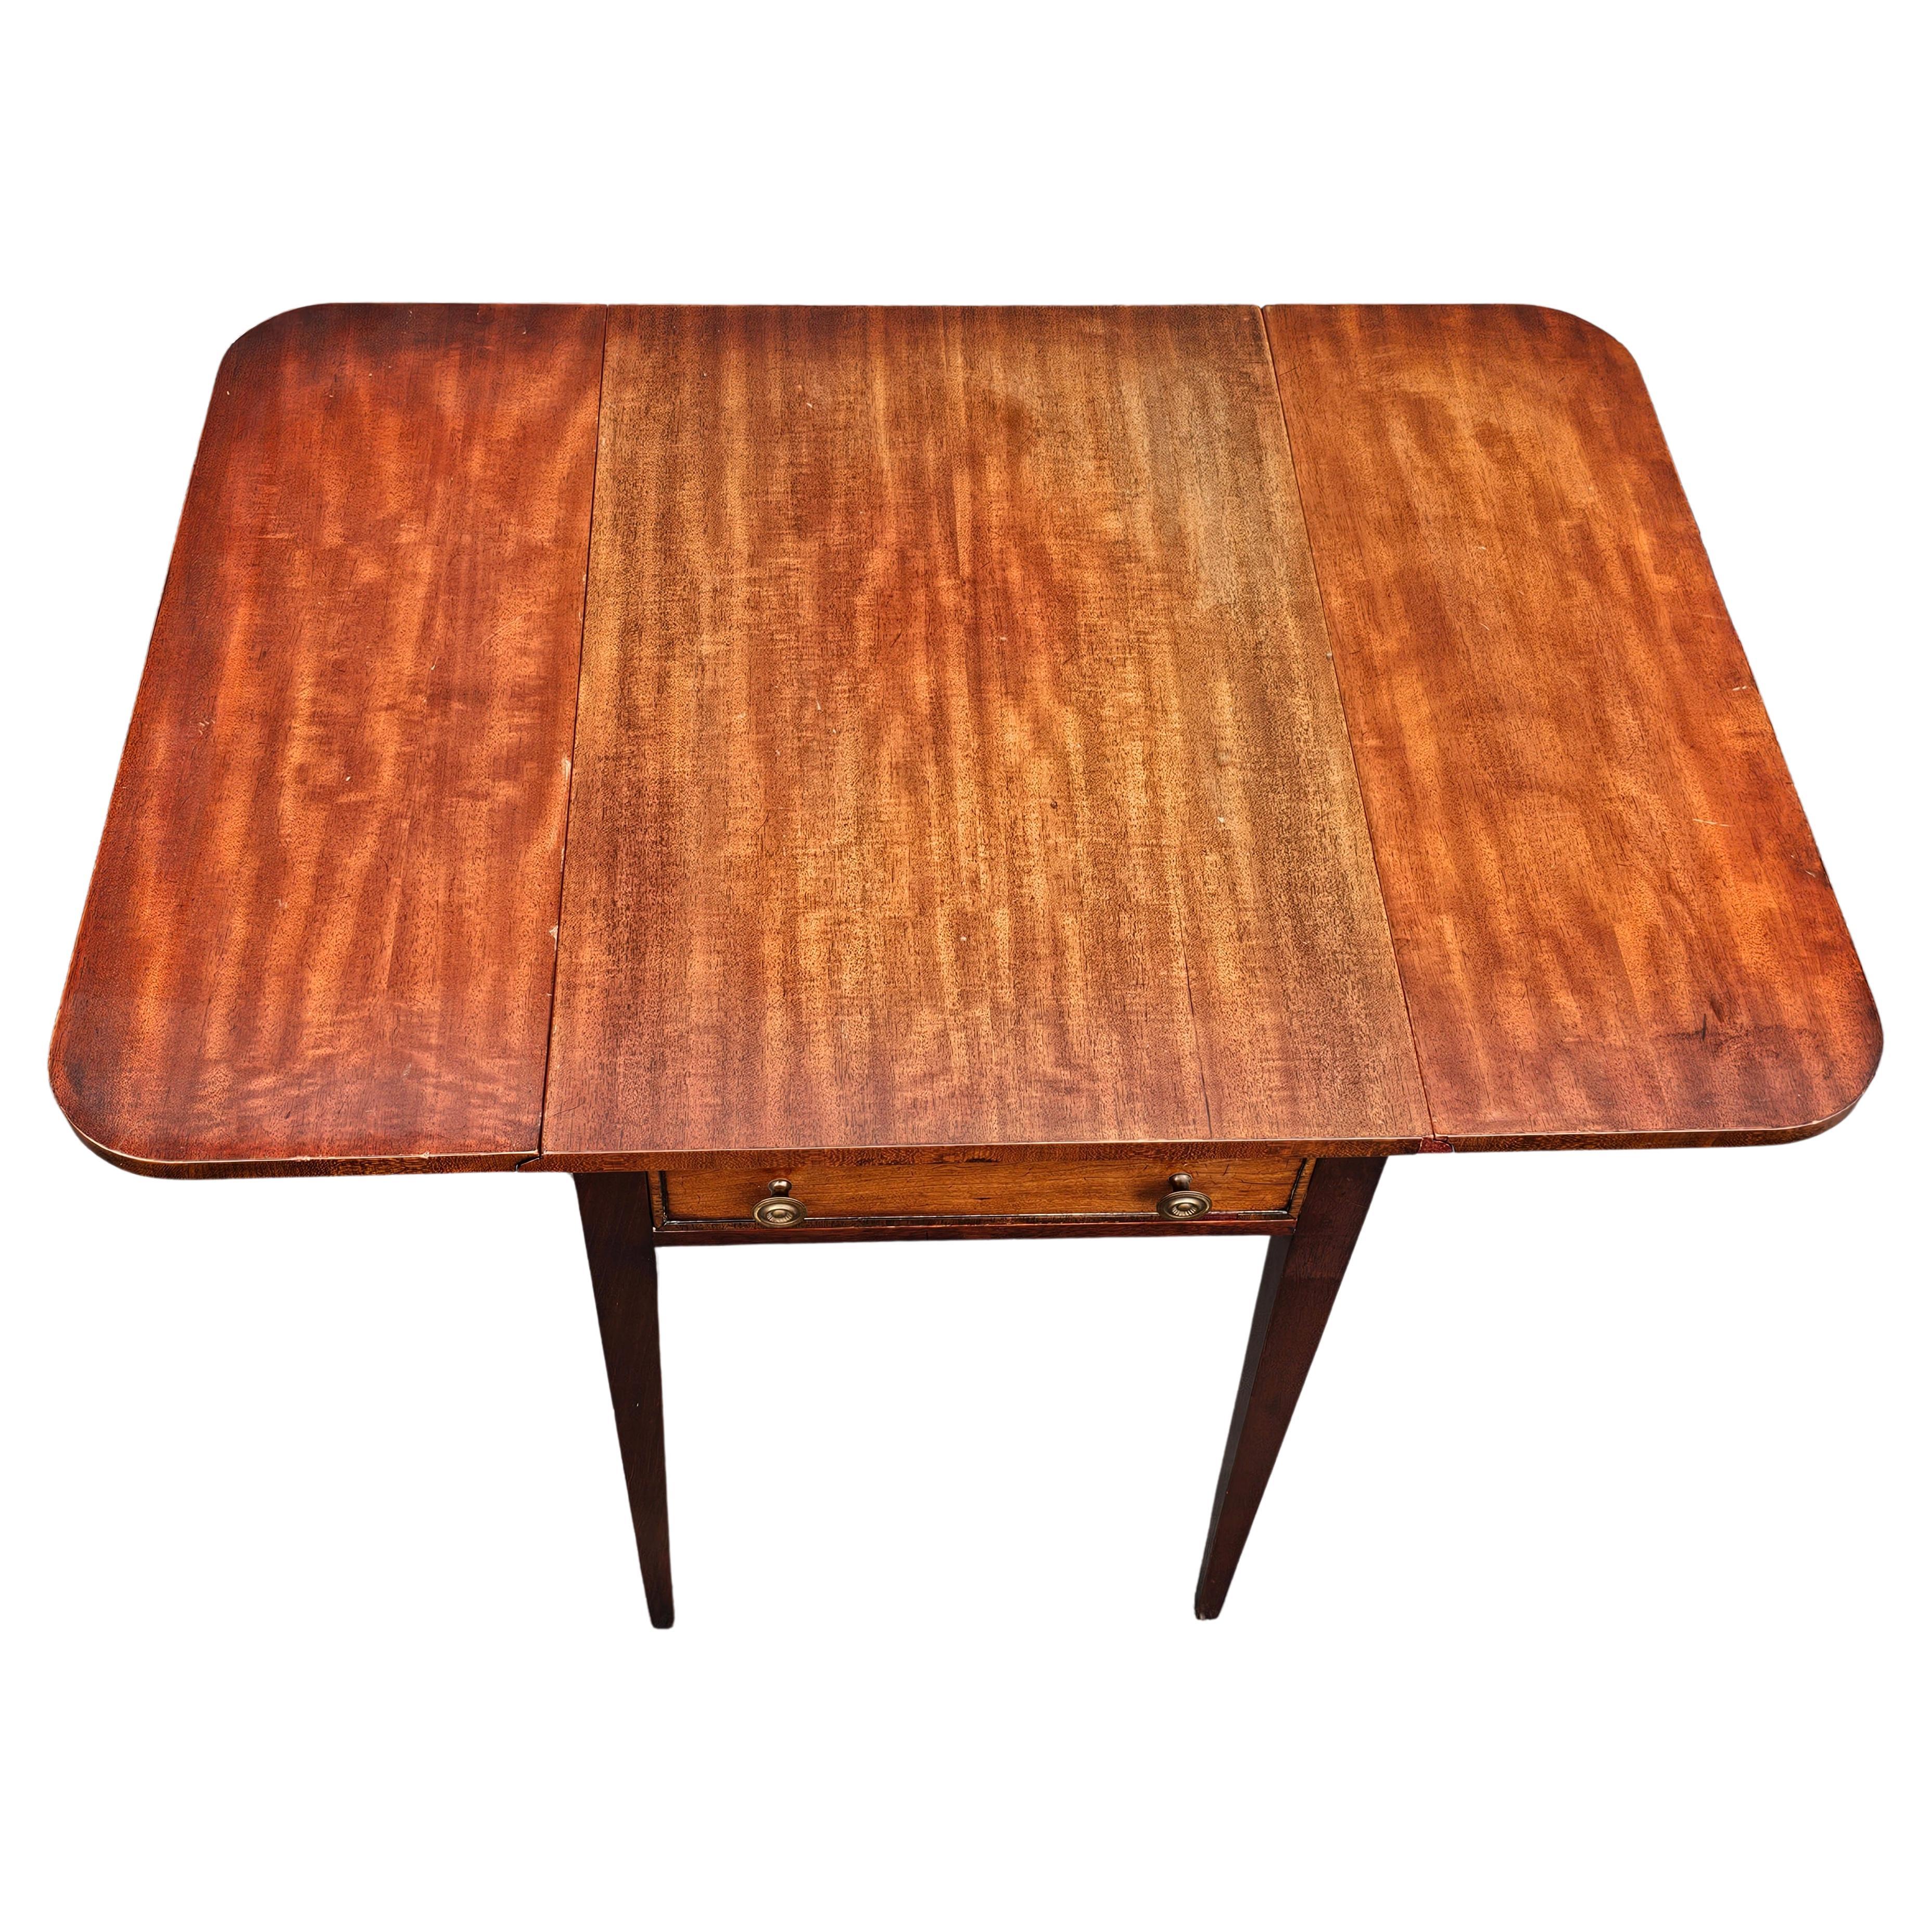 19th Century Federal Style Mahogany Pembroke Table For Sale 4